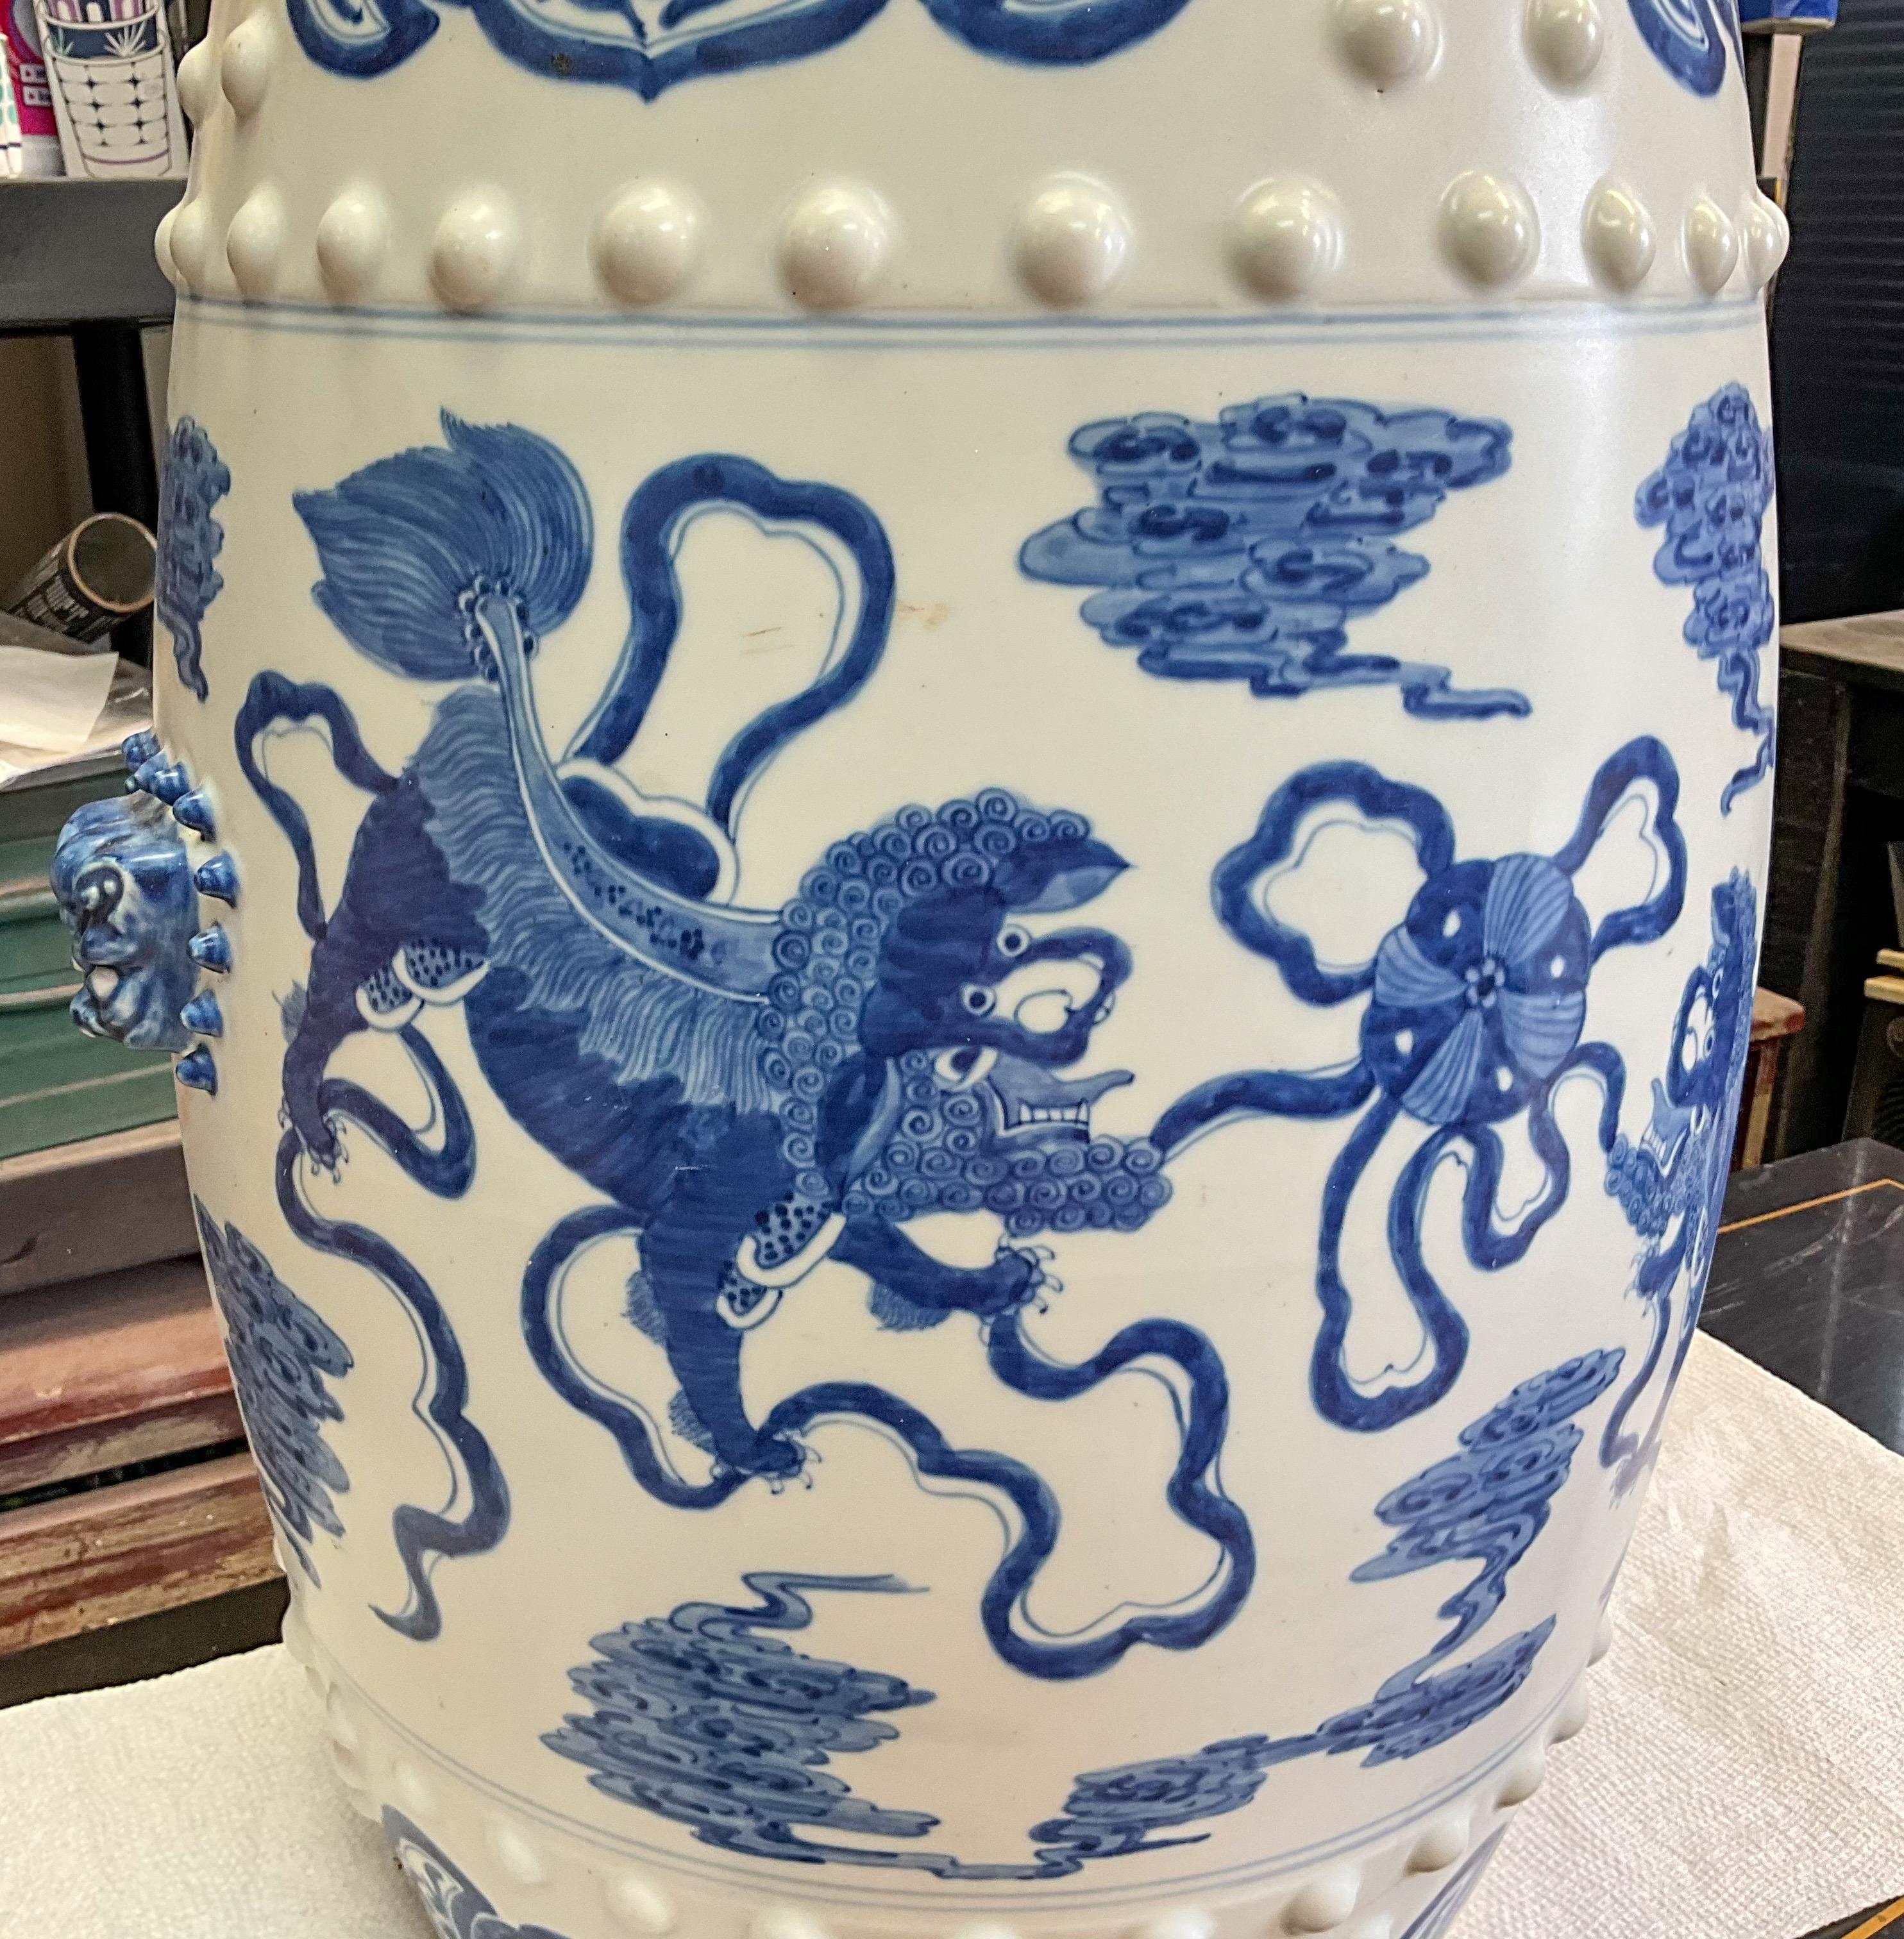 Chinese Export Style Blue and White Ceramic Foo Lion Garden Stools / Tables - 2 For Sale 1